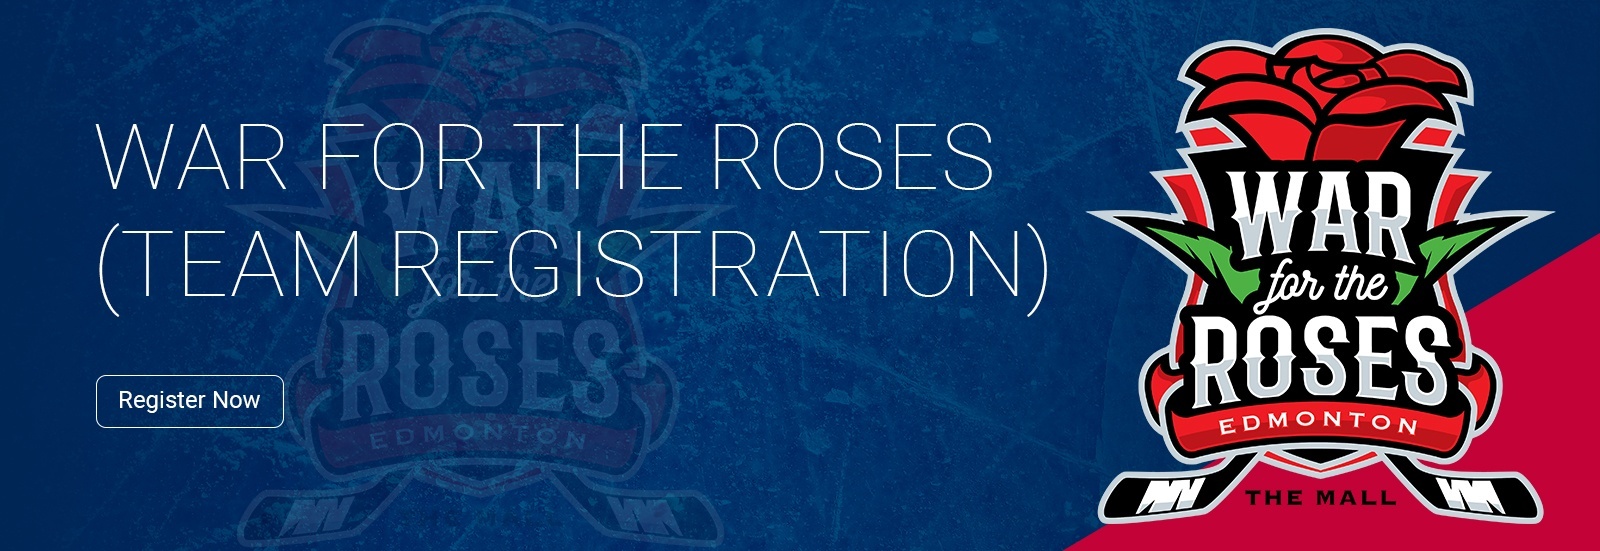 War For the Roses - Hockey Tournament Registration at Pro Hockey Development Group